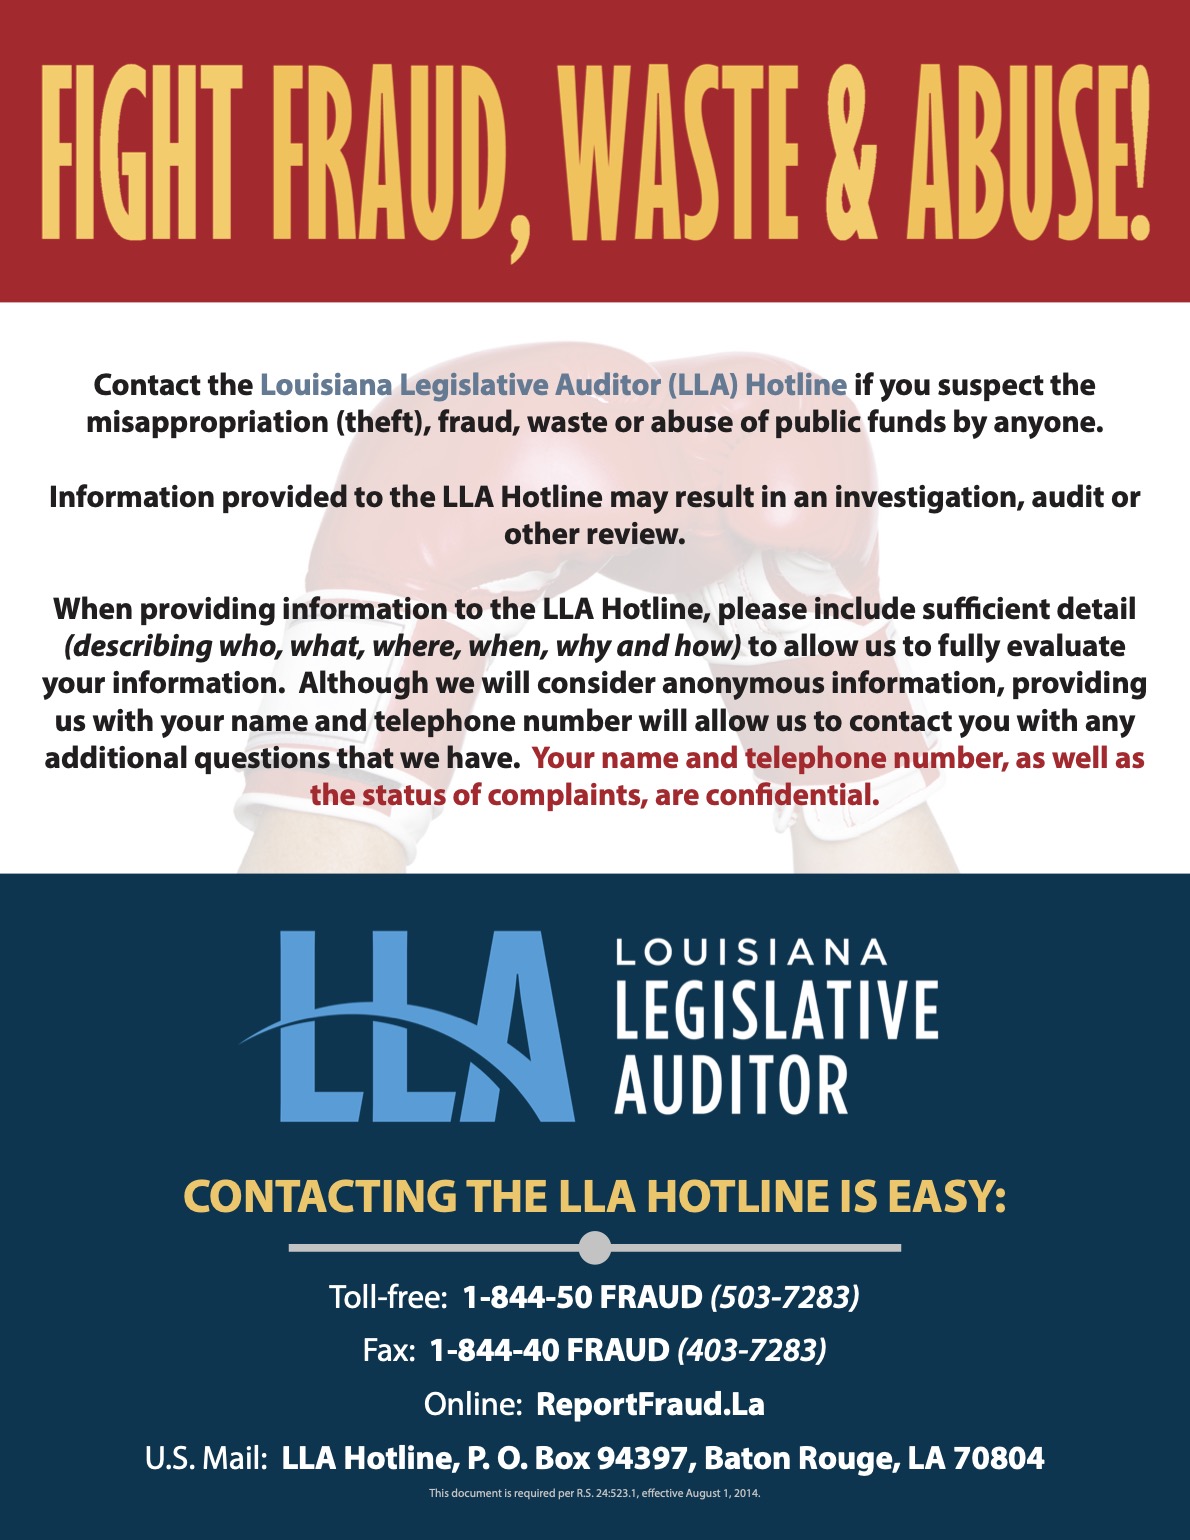 Contact the Louisiana Legislative Auditor (LLA) Hotline if you suspect the misappropriation (theft), fraud, waste or abuse of public funds by anyone. Information provided to the LLA Hotline may result in an investigation, audit or other review. When providing information to the LLA Hotline, please include sufficient detail (describing who, what, where, when, why and how) to allow us to fully evaluate your information. Although we will consider anonymous information, providing us with your name and telephone number will allow us to contact you with any additional questions that we have. Your name and telephone number, as well as the status of complaints, are confidential.  CONTACTING THE LLA HOTLINE IS EASY: Toll-free: 1-844-50 FRAUD (503-7283) Fax: 1-844-40 FRAUD (403-7283) Online: ReportFraud.La U.S. Mail: LLA Hotline, P. O. Box 94397, Baton Rouge, LA 70804 This document is required per R.S. 24:523.1, effective August 1, 2014.